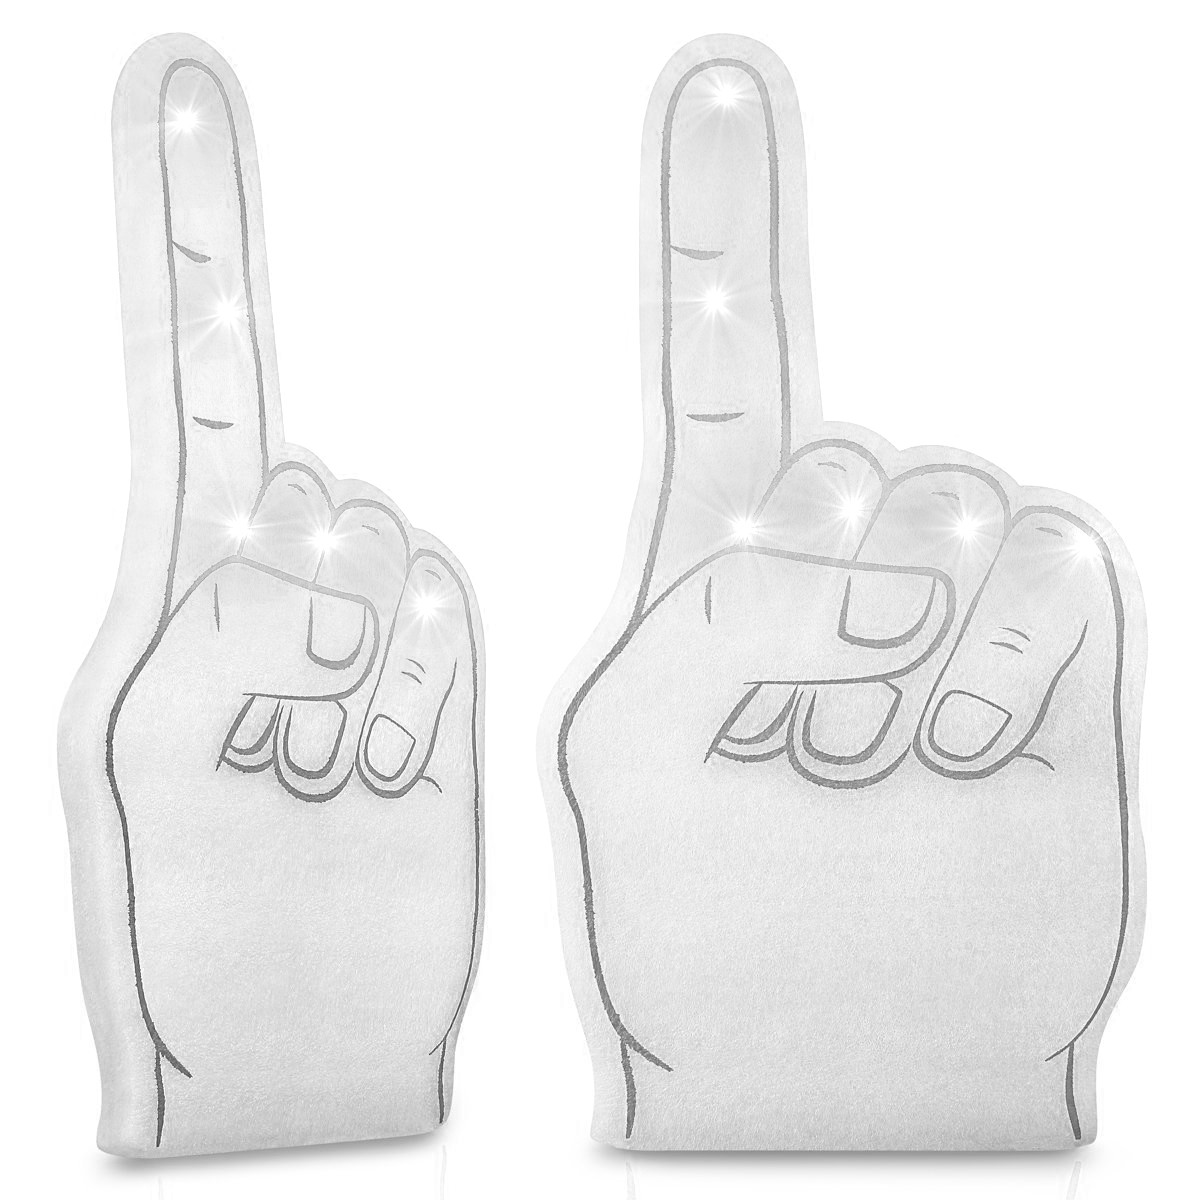 Number One Foam Light Up Finger White All Products